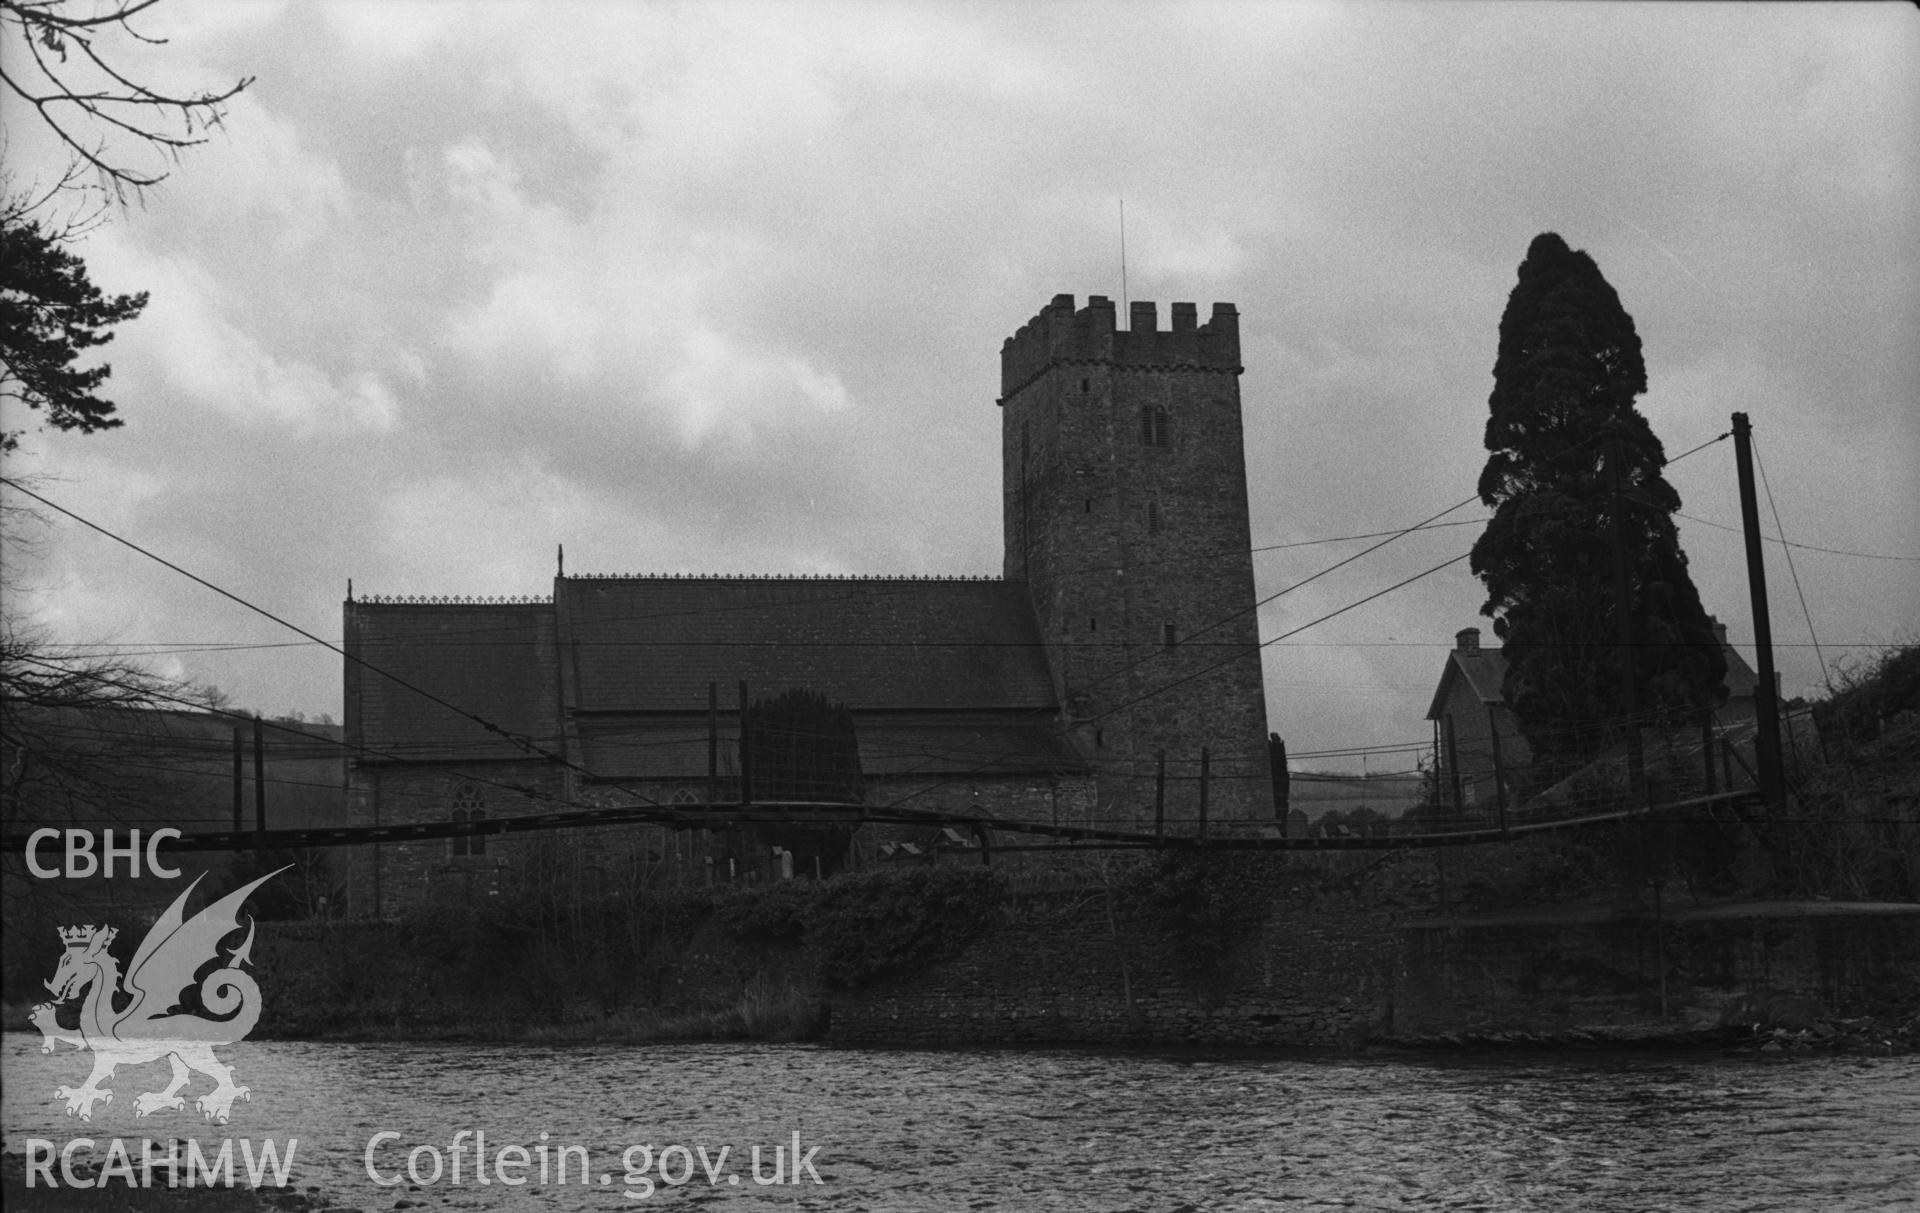 Digital copy of a black and white negative showing exterior view of St Tysul's Church and suspension bridge to Dol-llan at Llandysul. Photographed in April 1963 by Arthur O. Chater from Grid Reference SN 4193 4078, looking south south west.